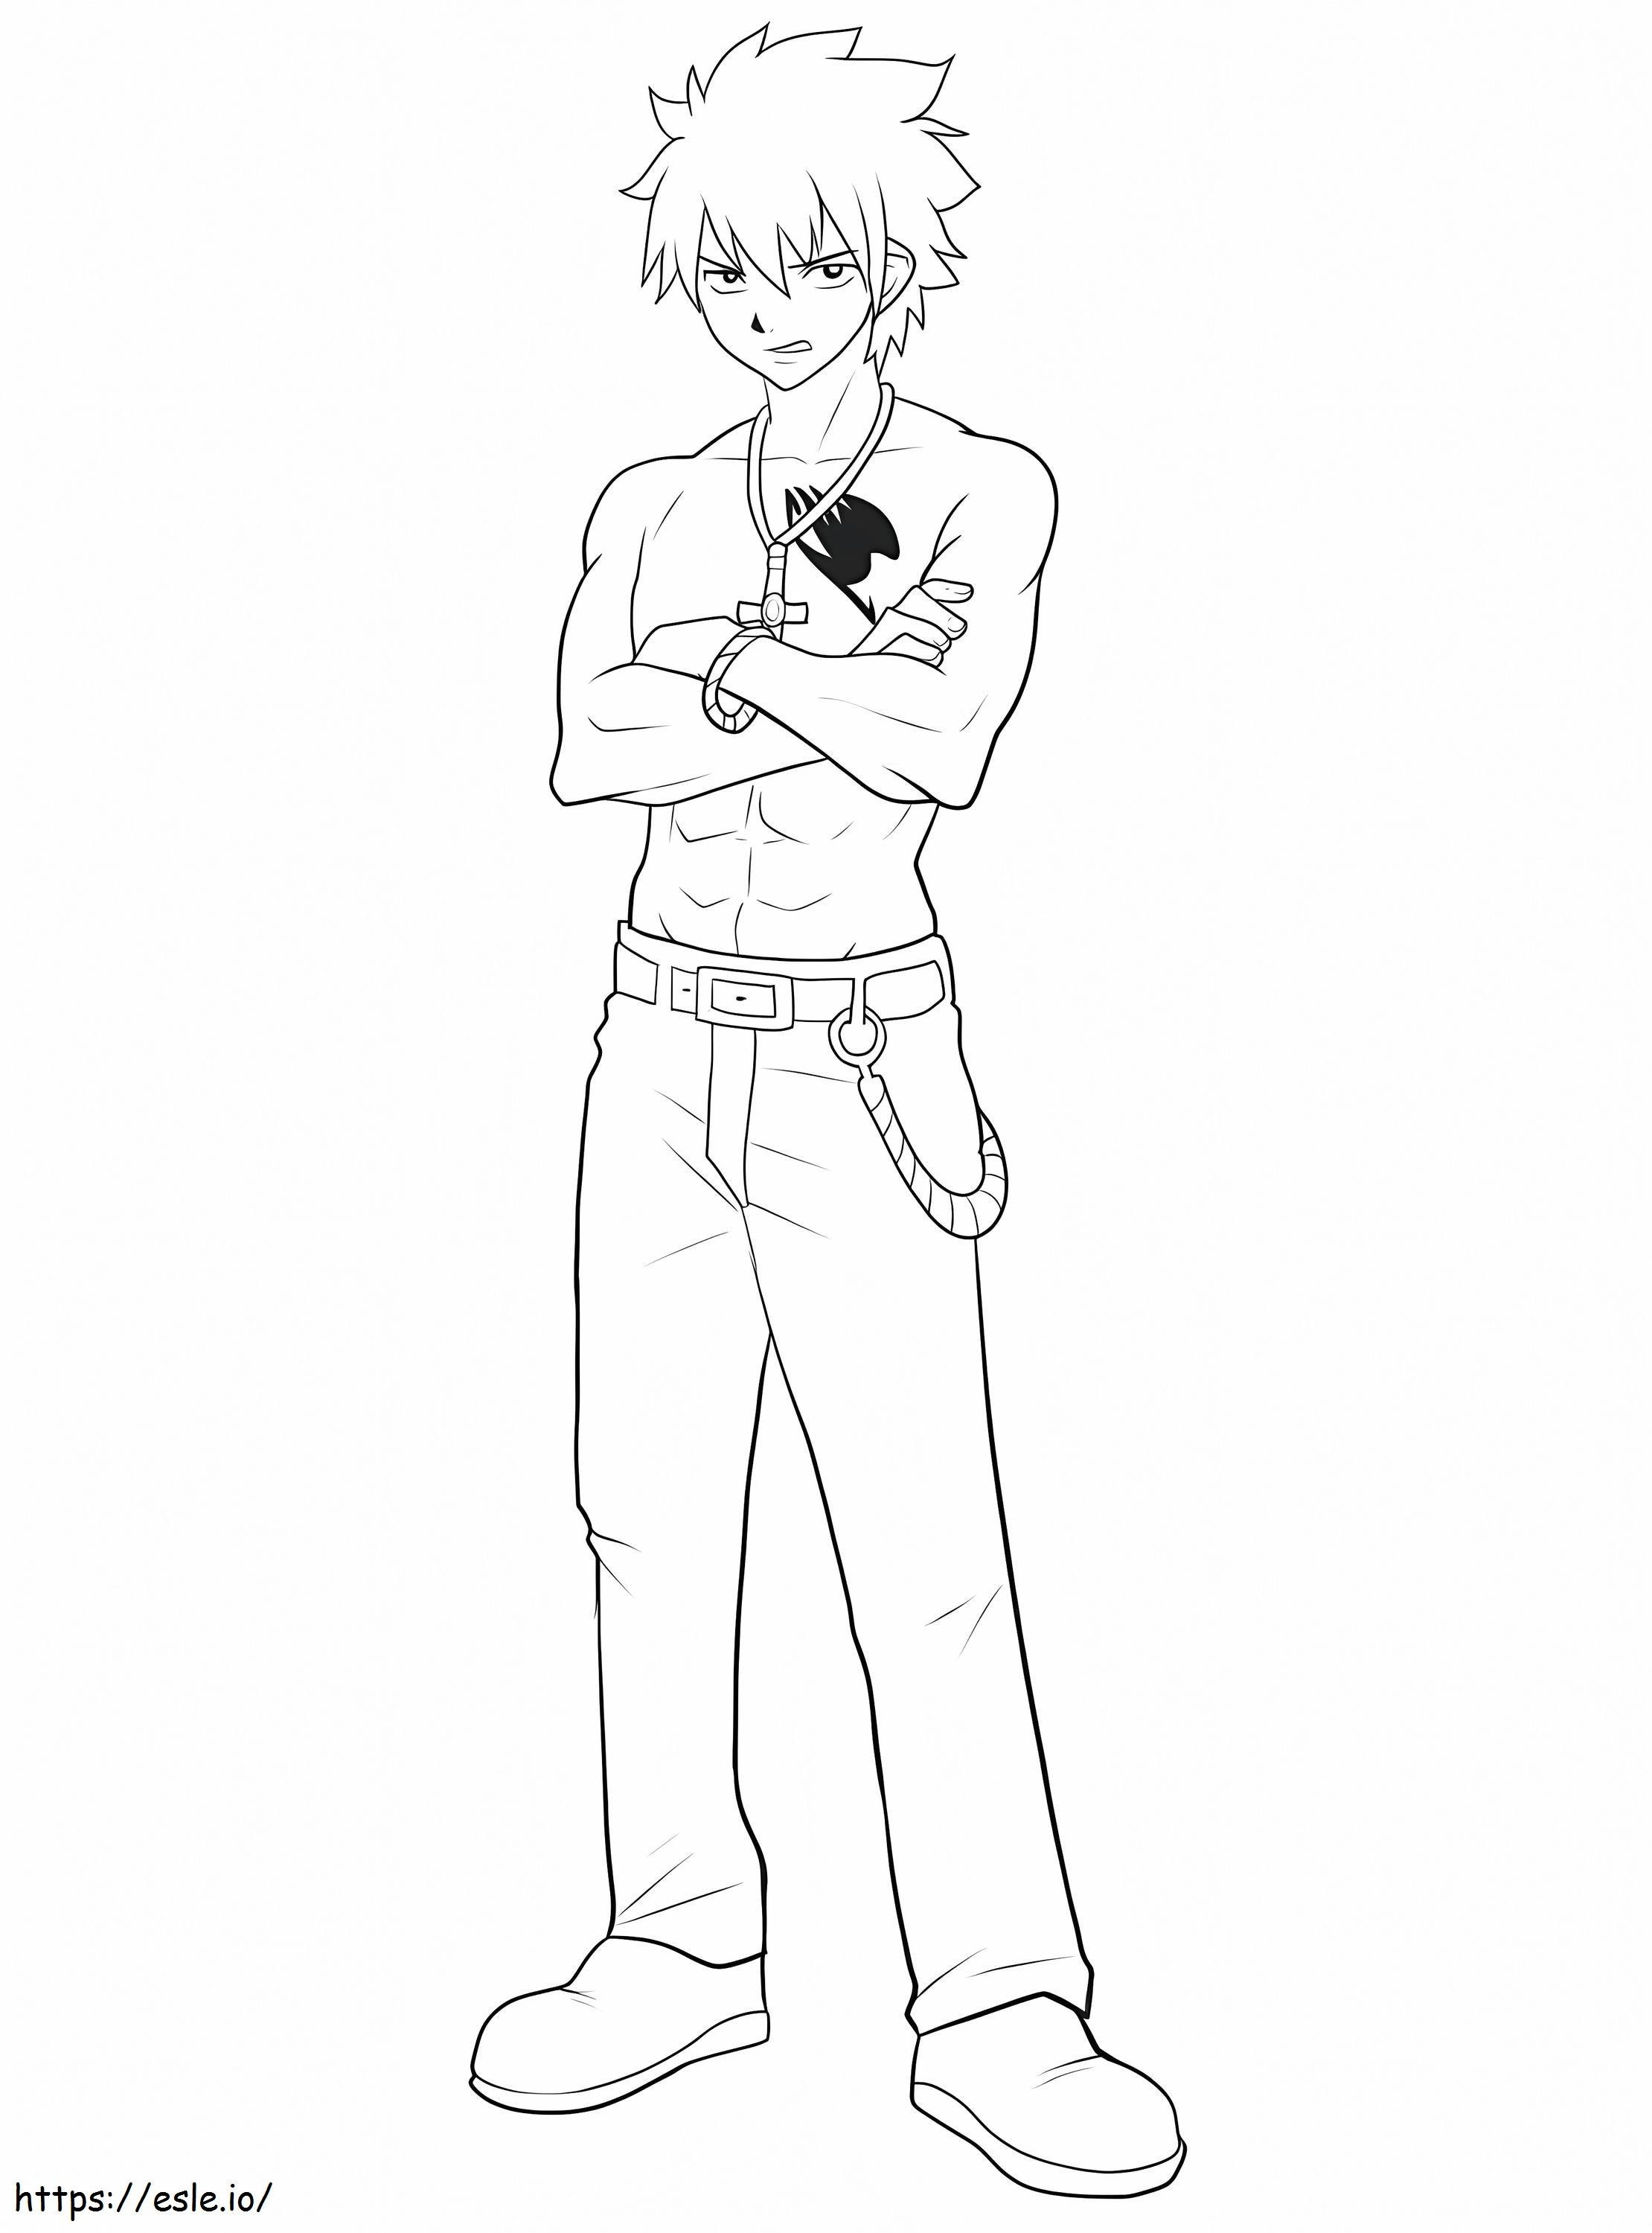 Grey Fullbuster Fairy Tail coloring page